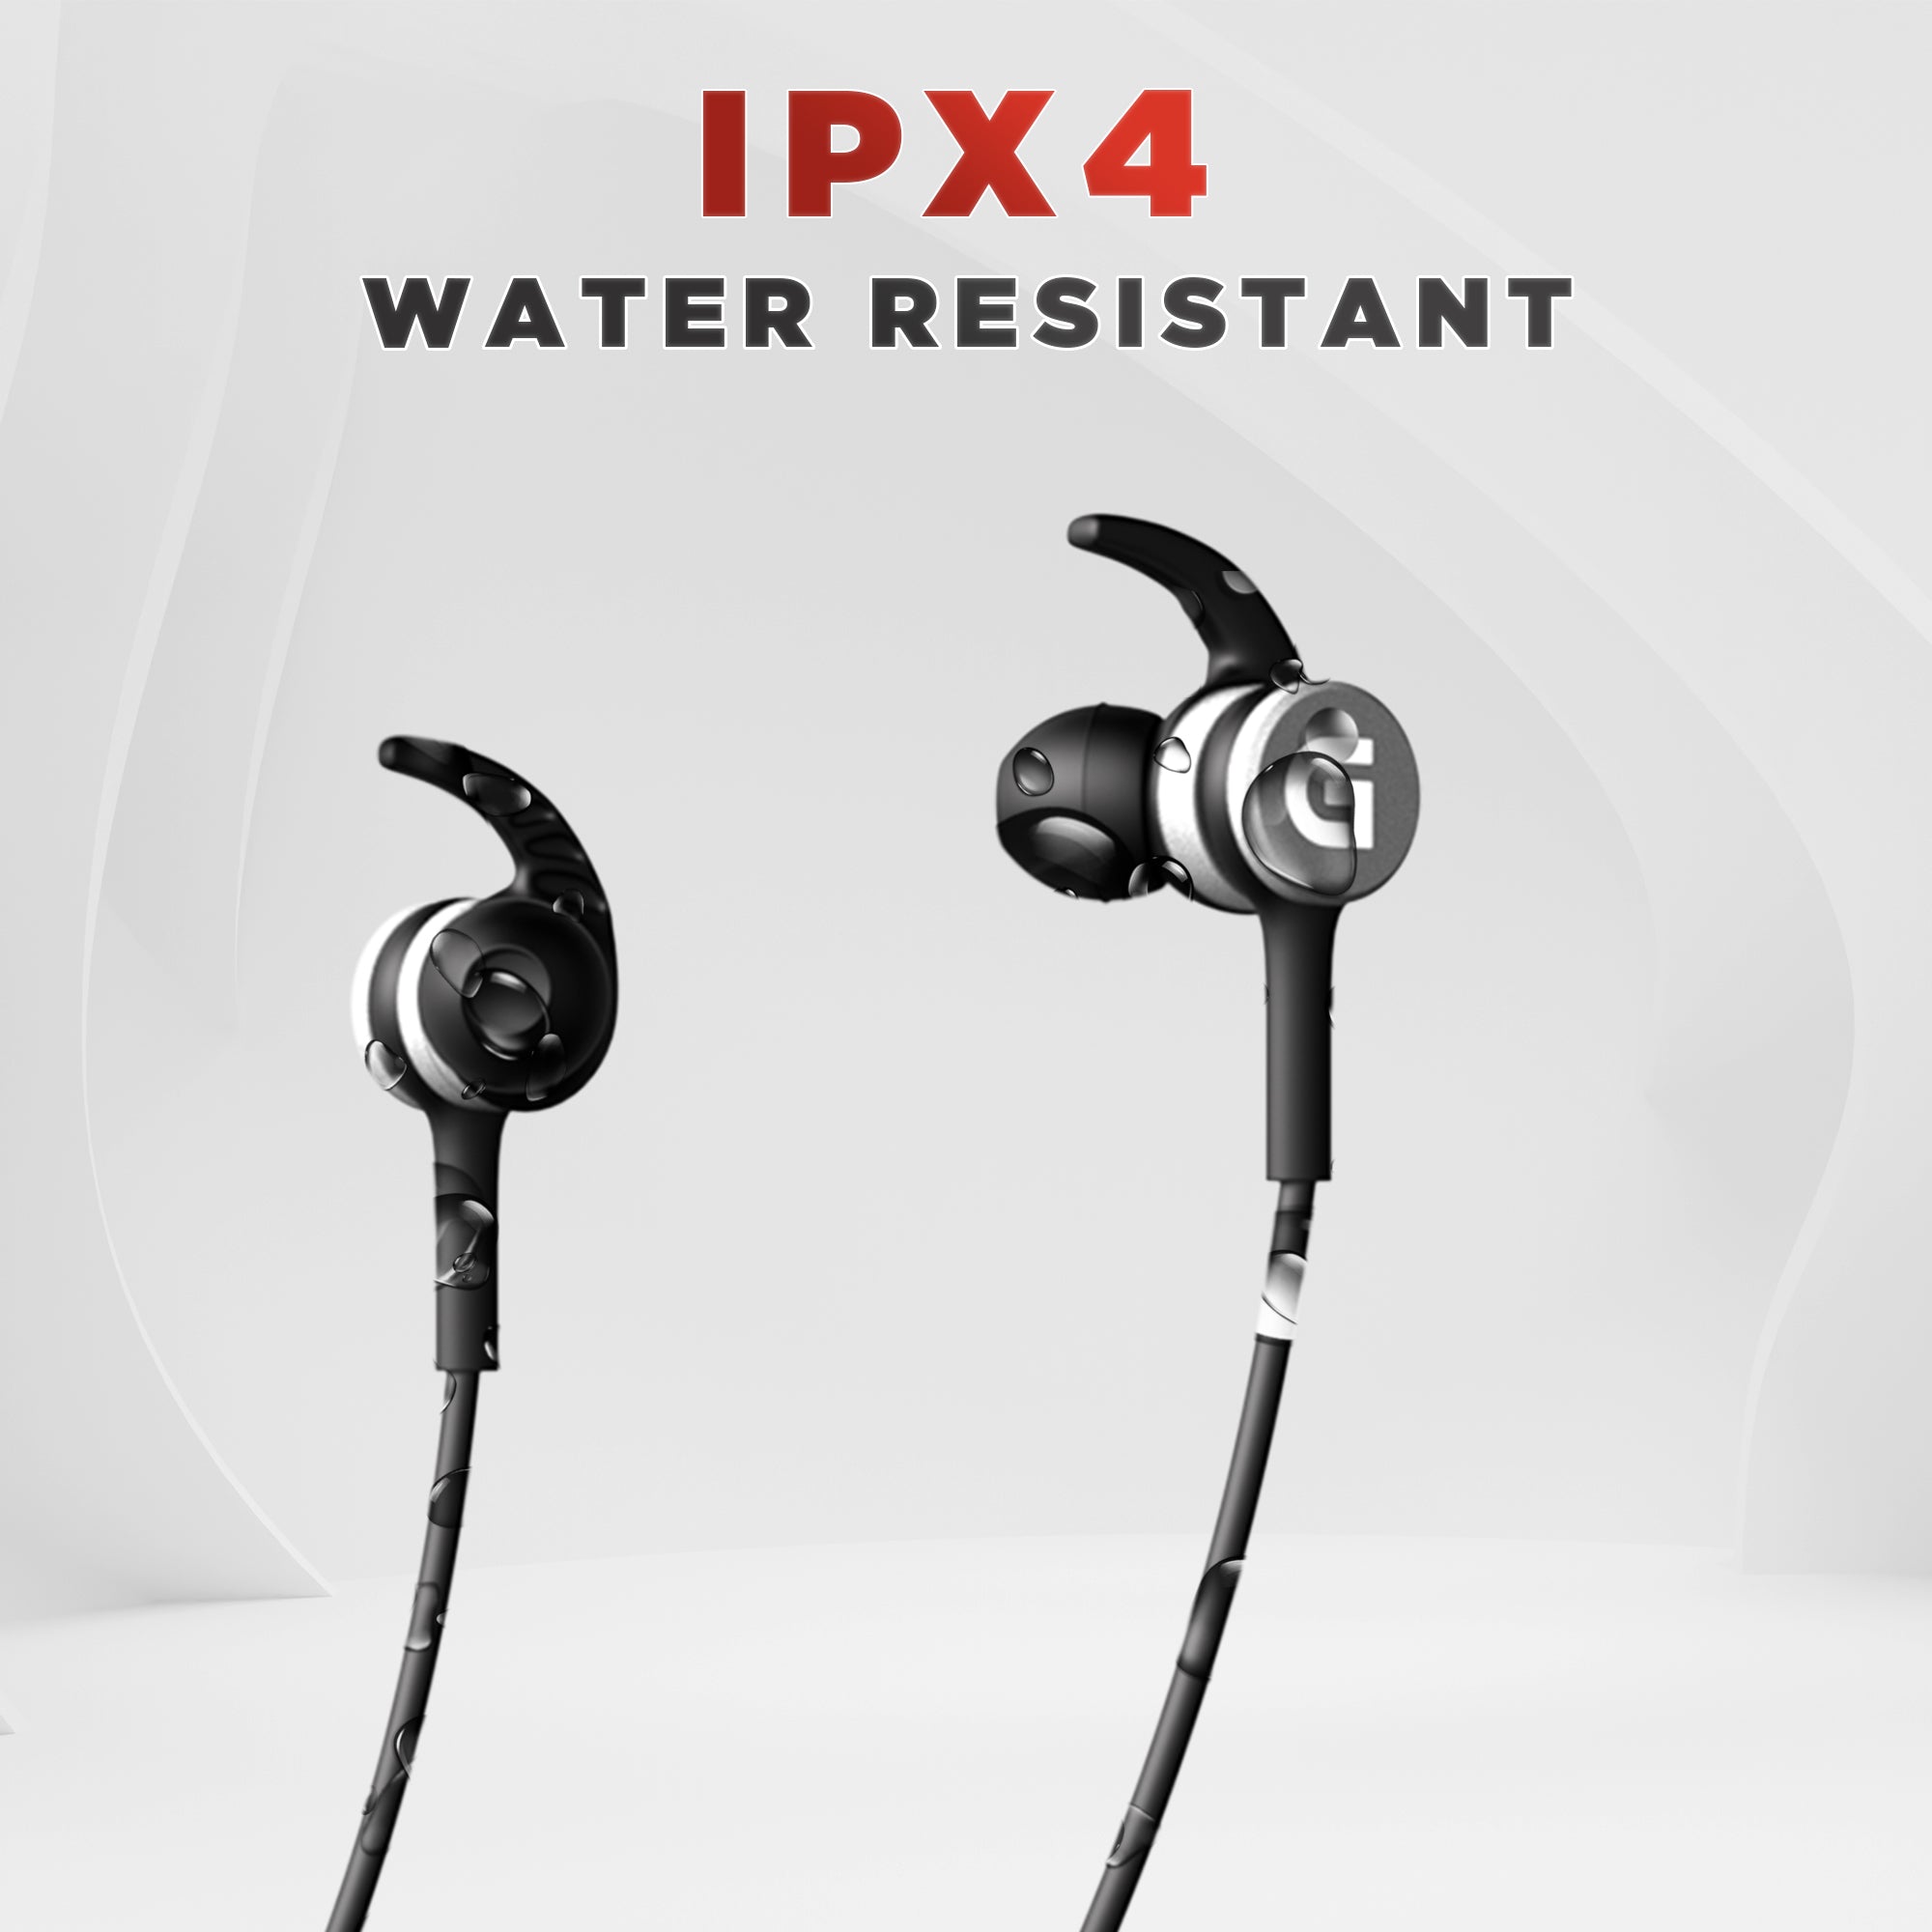 GIZMORE MN219 in-Ear Bluetooth Neckband with ENC Mode I Type-C Quick Charge I Upto 40 Hours Playback I Deep Bass I IPX4 Water Resistant I Voice Assistant